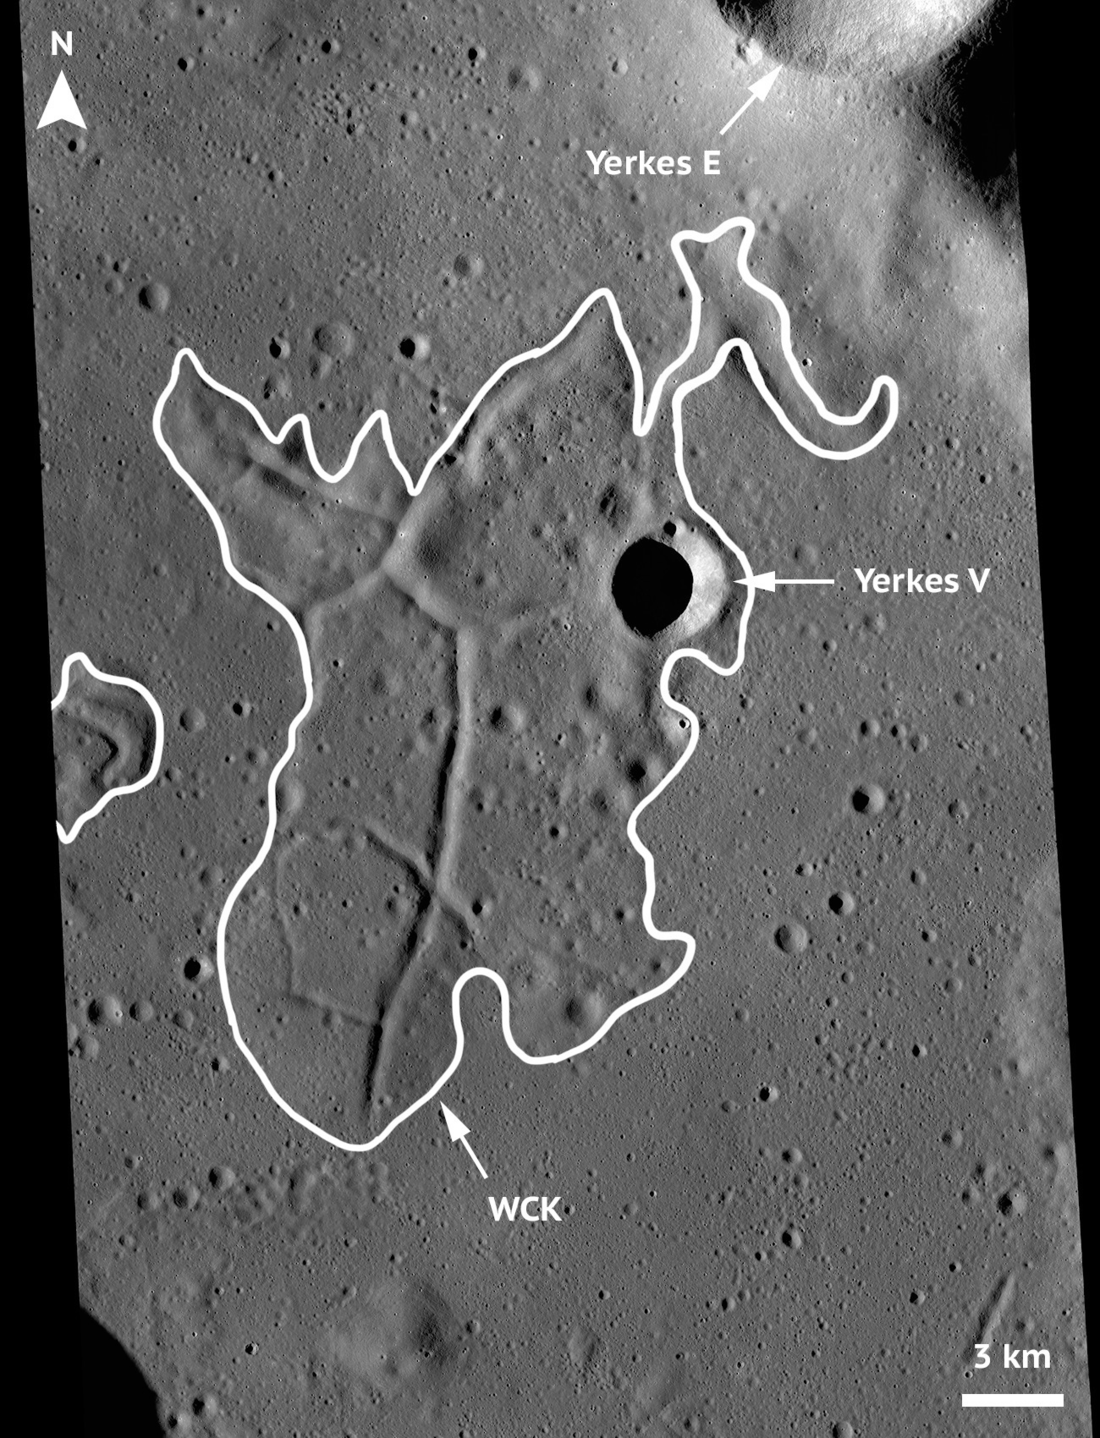 Controlled low-Sun NAC mosaic showing the WCK centered in the middle surrounded by the Mare Crisium. The boundary of the kipuka (where the fractures end) is traced in white. There is a small crater on the right-hand side of the kipuka (labeled Yerkes V), as well as a partial crater in the top right corner of the image (labeled Yerkes E). North is towards the top of the page.